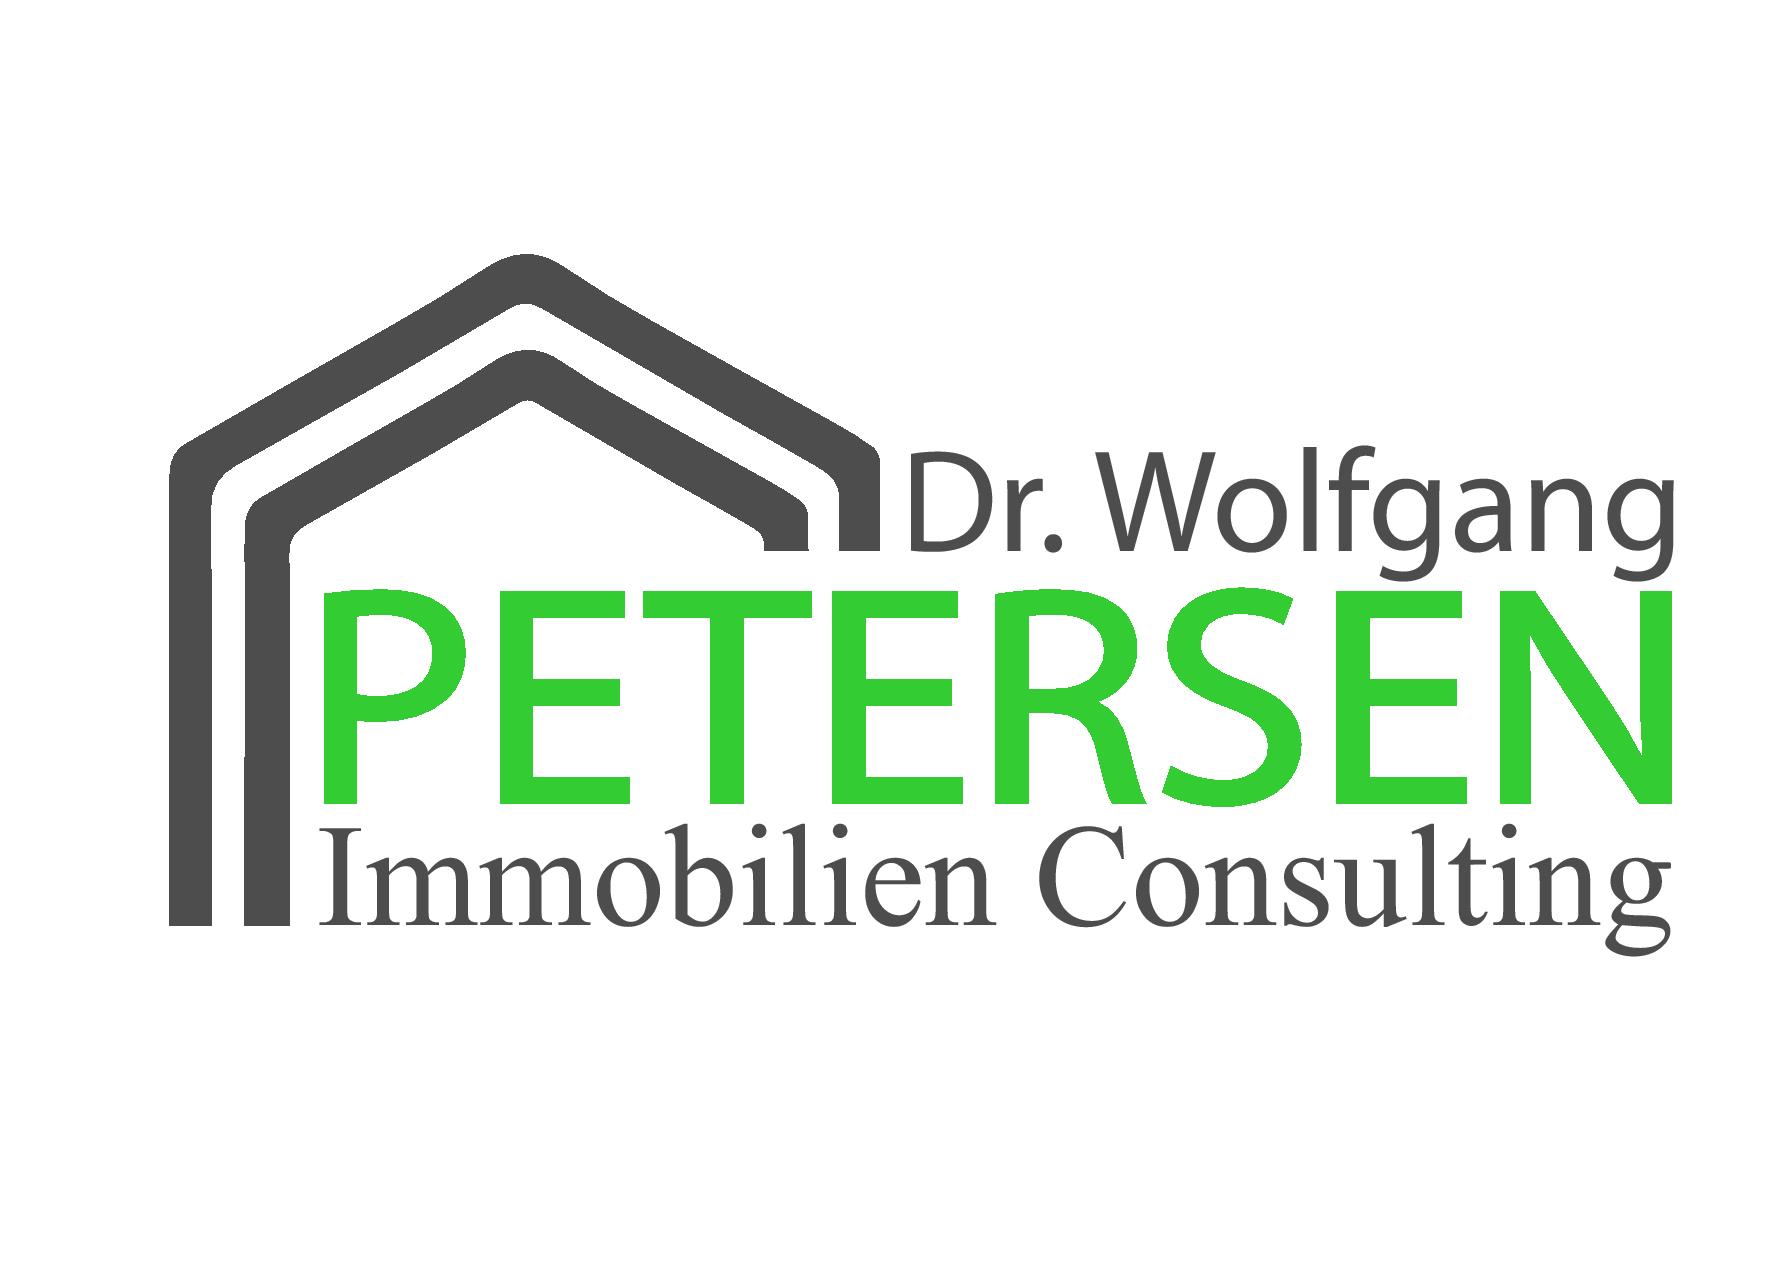 Dr. Wolfgang Petersen Immobilien Consulting